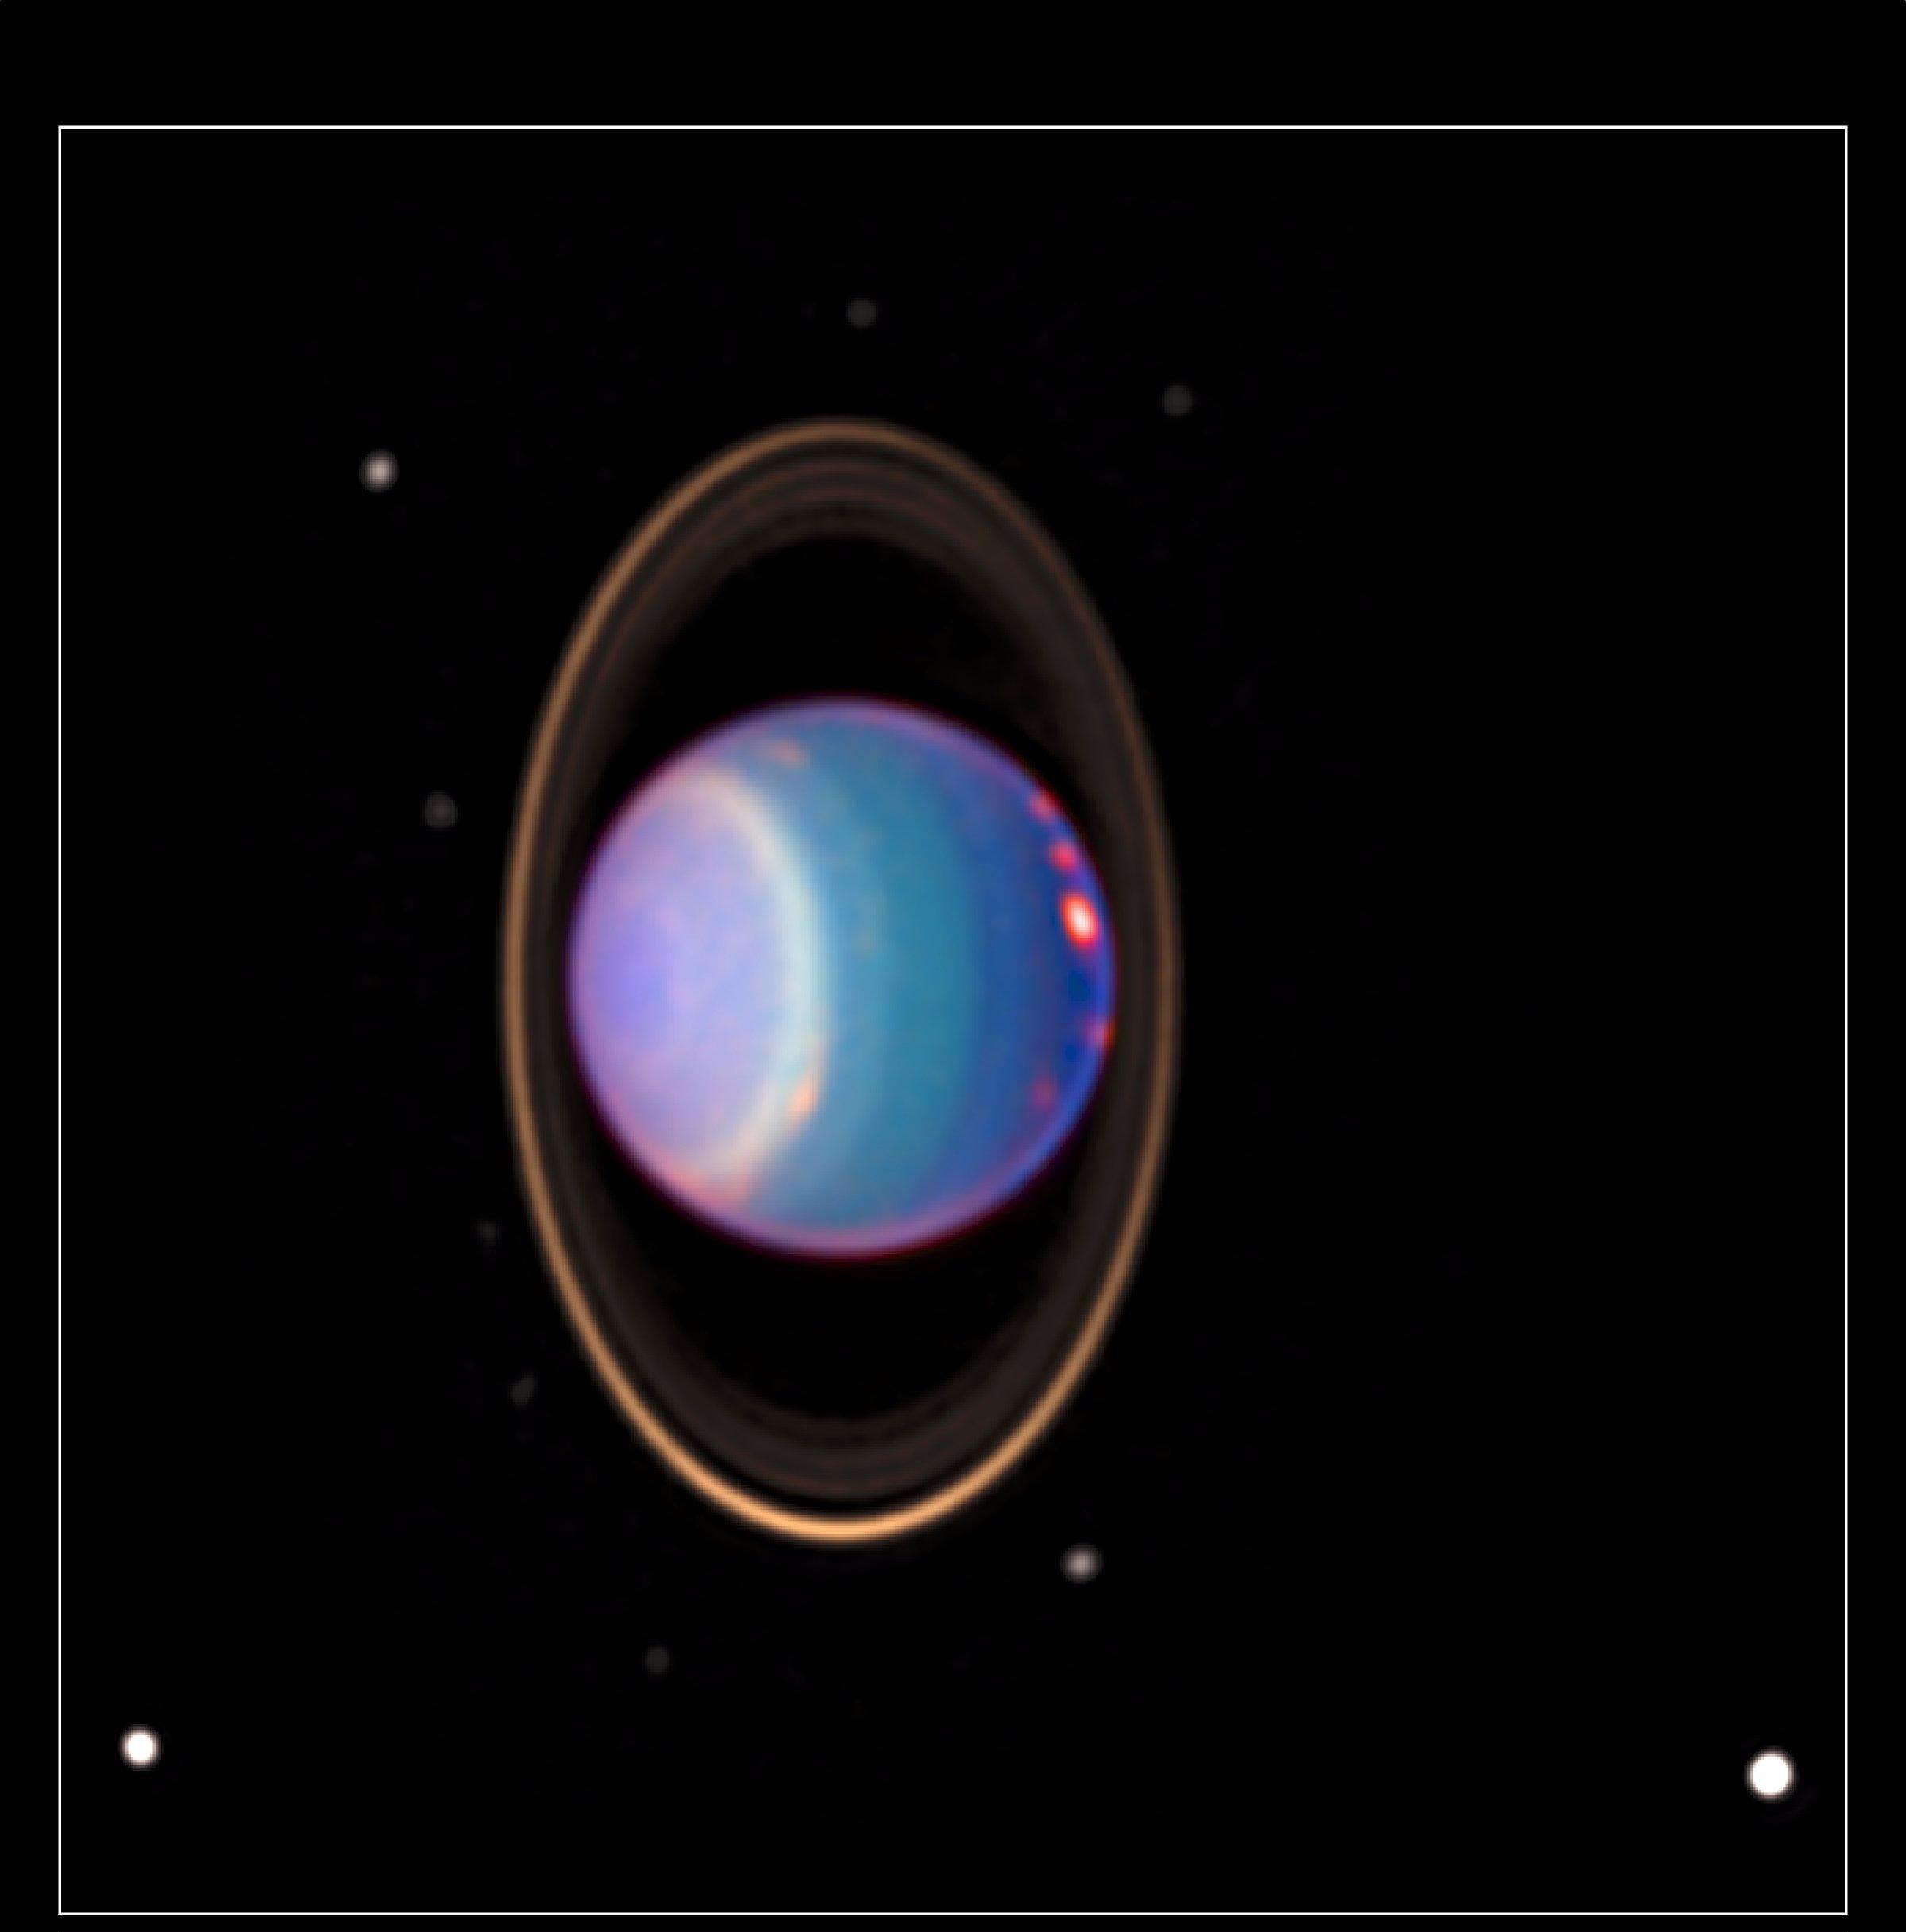 Images of uranus and All Available Satellites